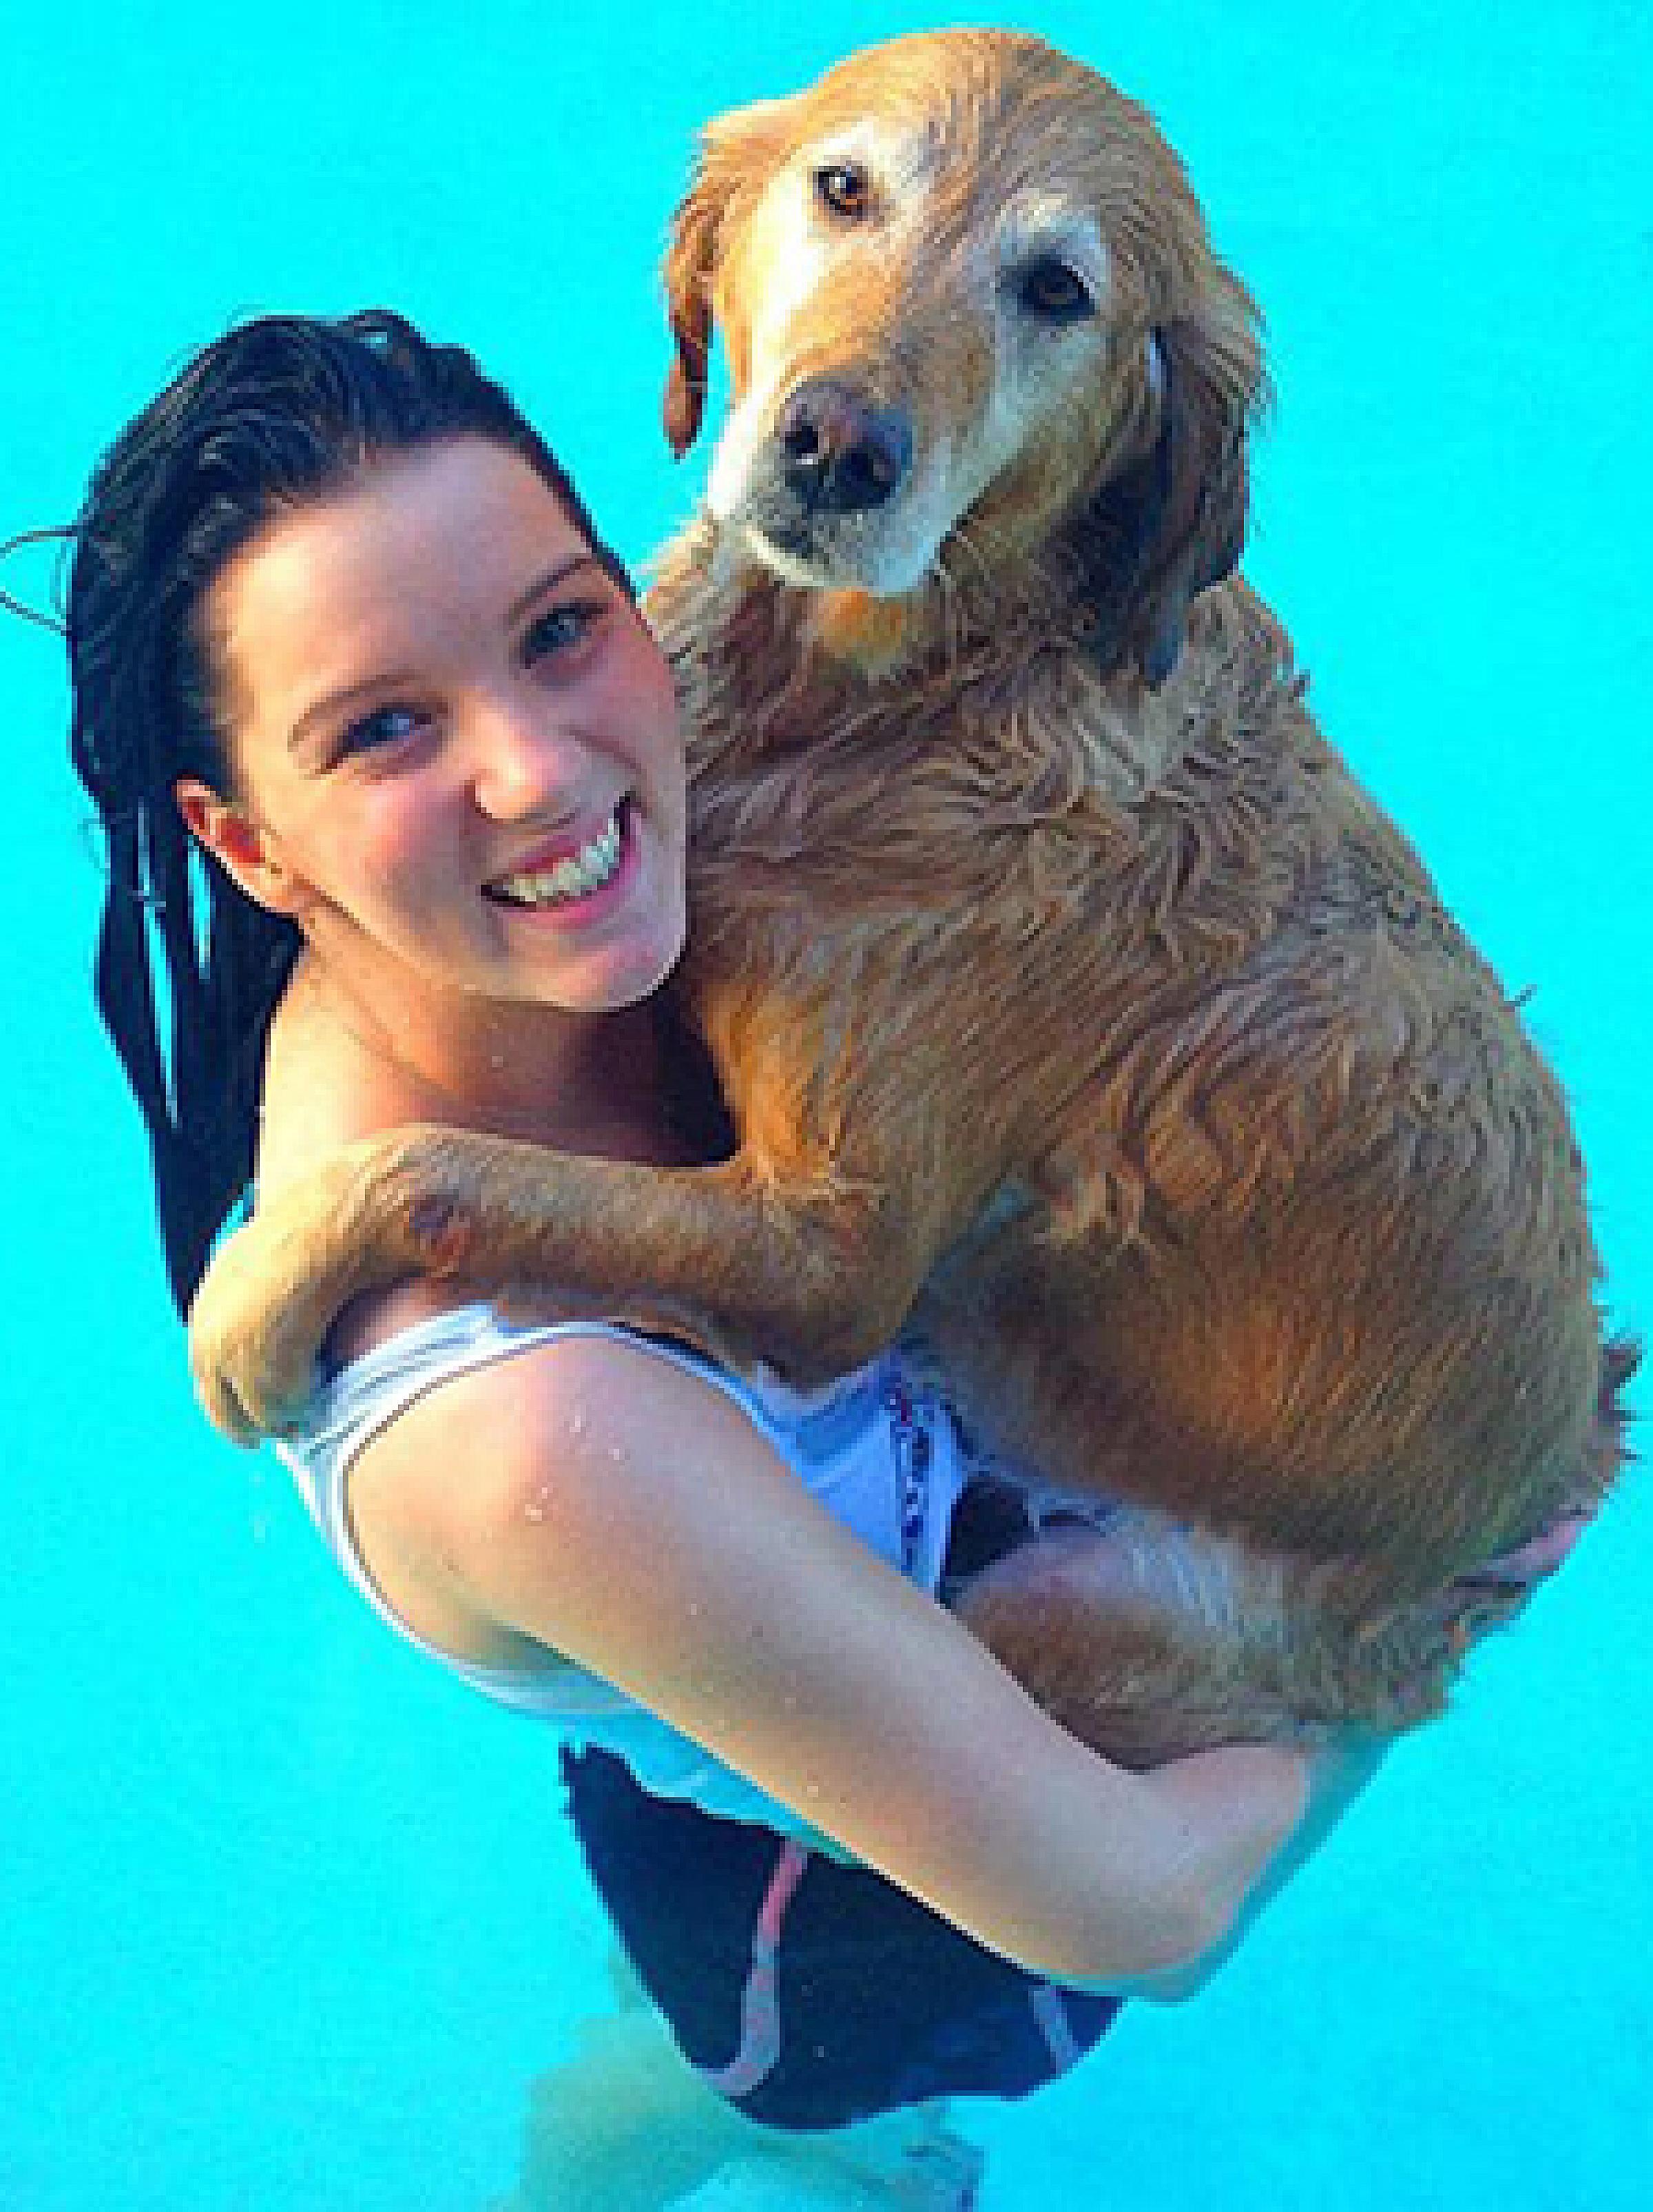 Natalie in a swimming pool holding a golden retriever and smiling